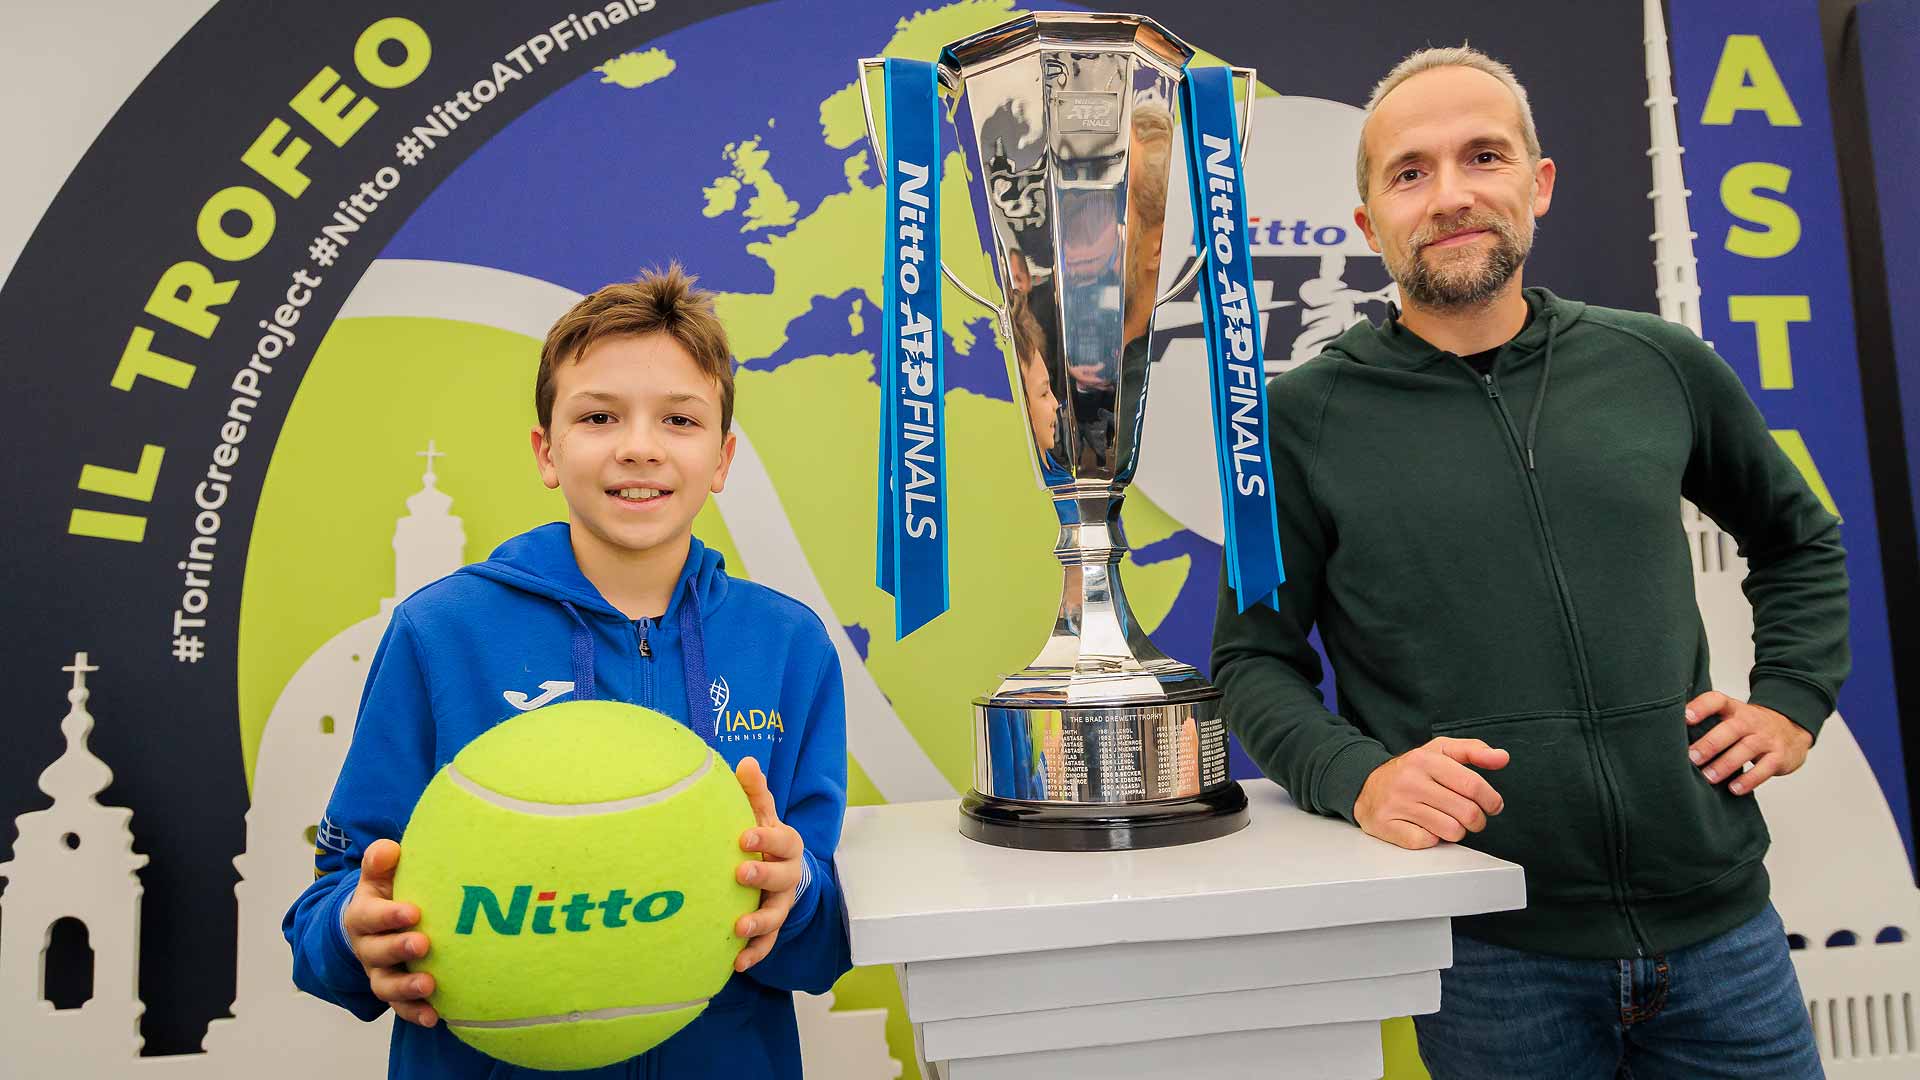 Fans pose with a replica of the Nitto ATP Finals trophy at the Pala Alpitour's Fan Village.